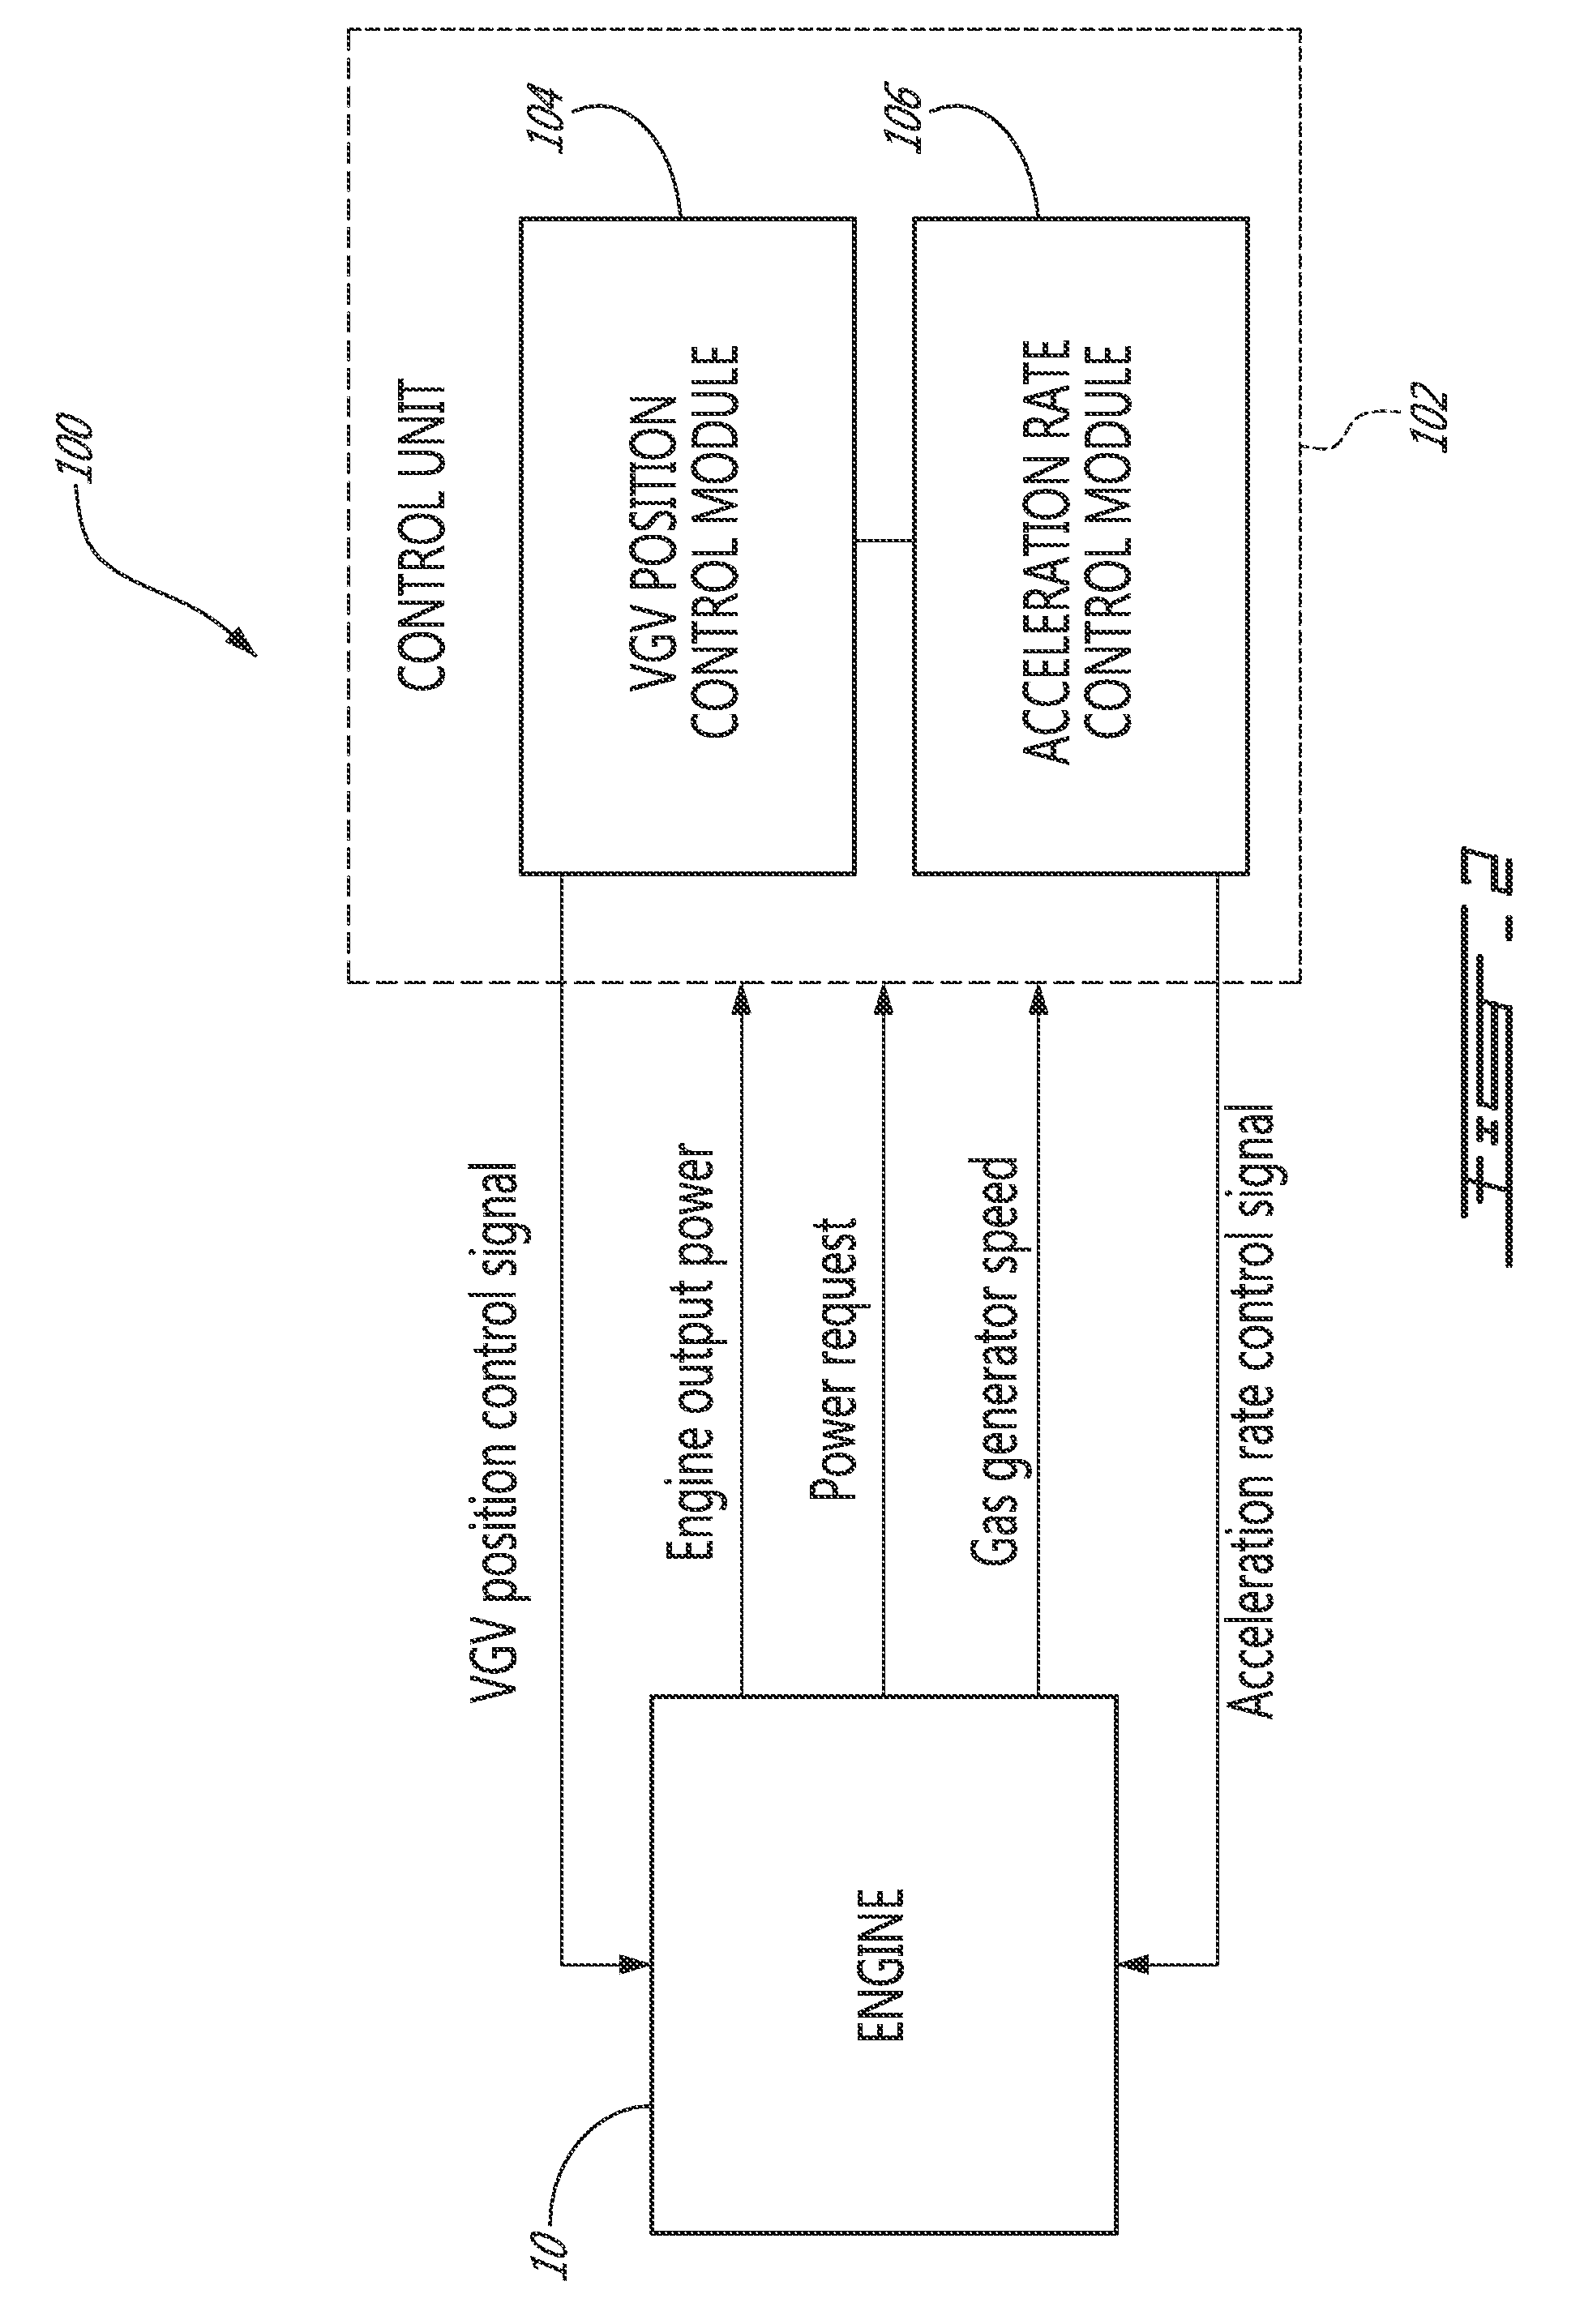 System and method for engine transient power response